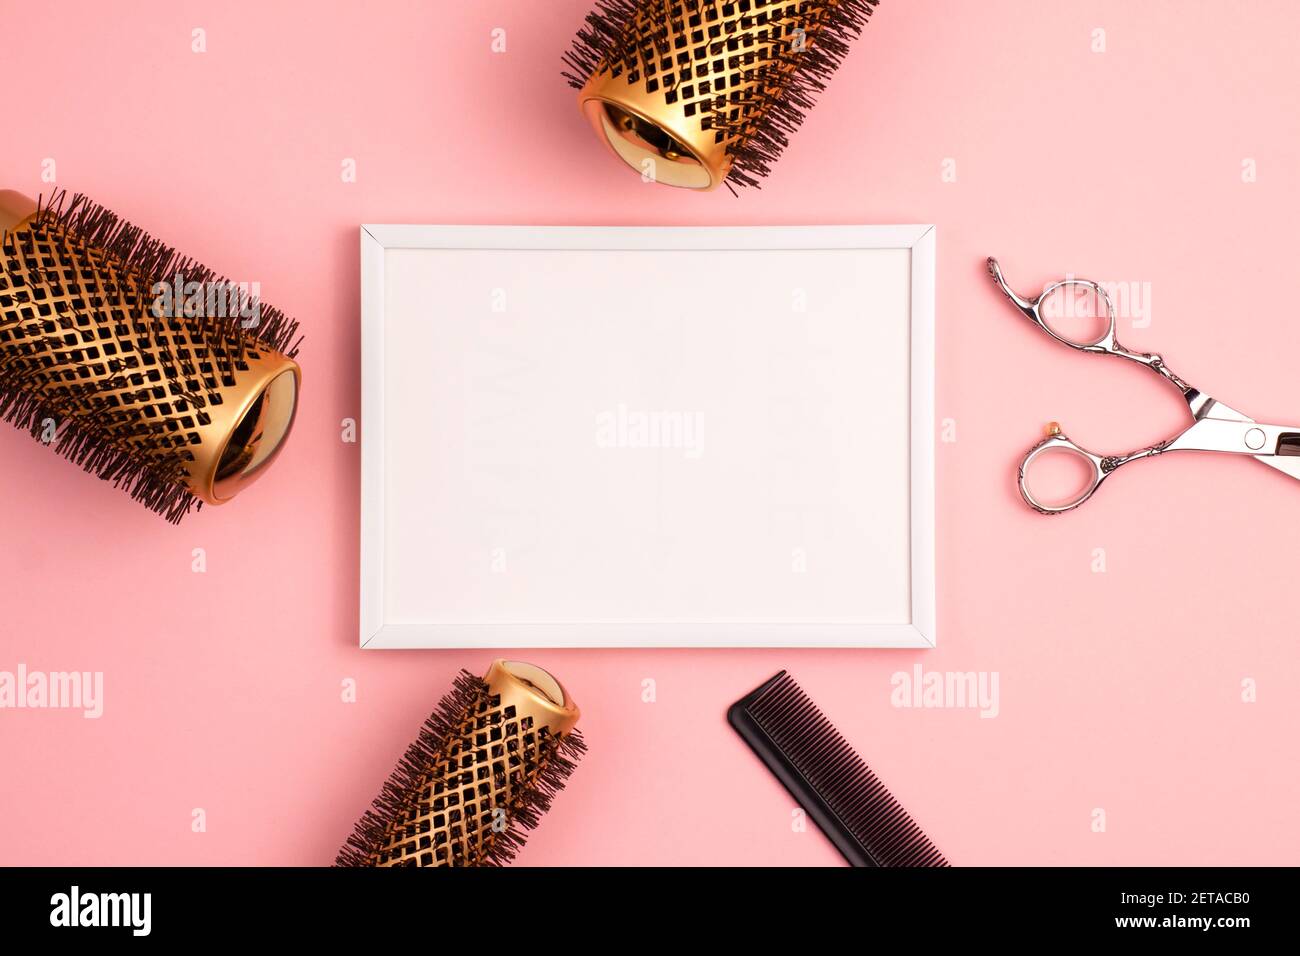 Plastic picture frame mockup flat lay of professional hair cutting shears, gold round hair brush for styling, comb for separating hair template and pi Stock Photo